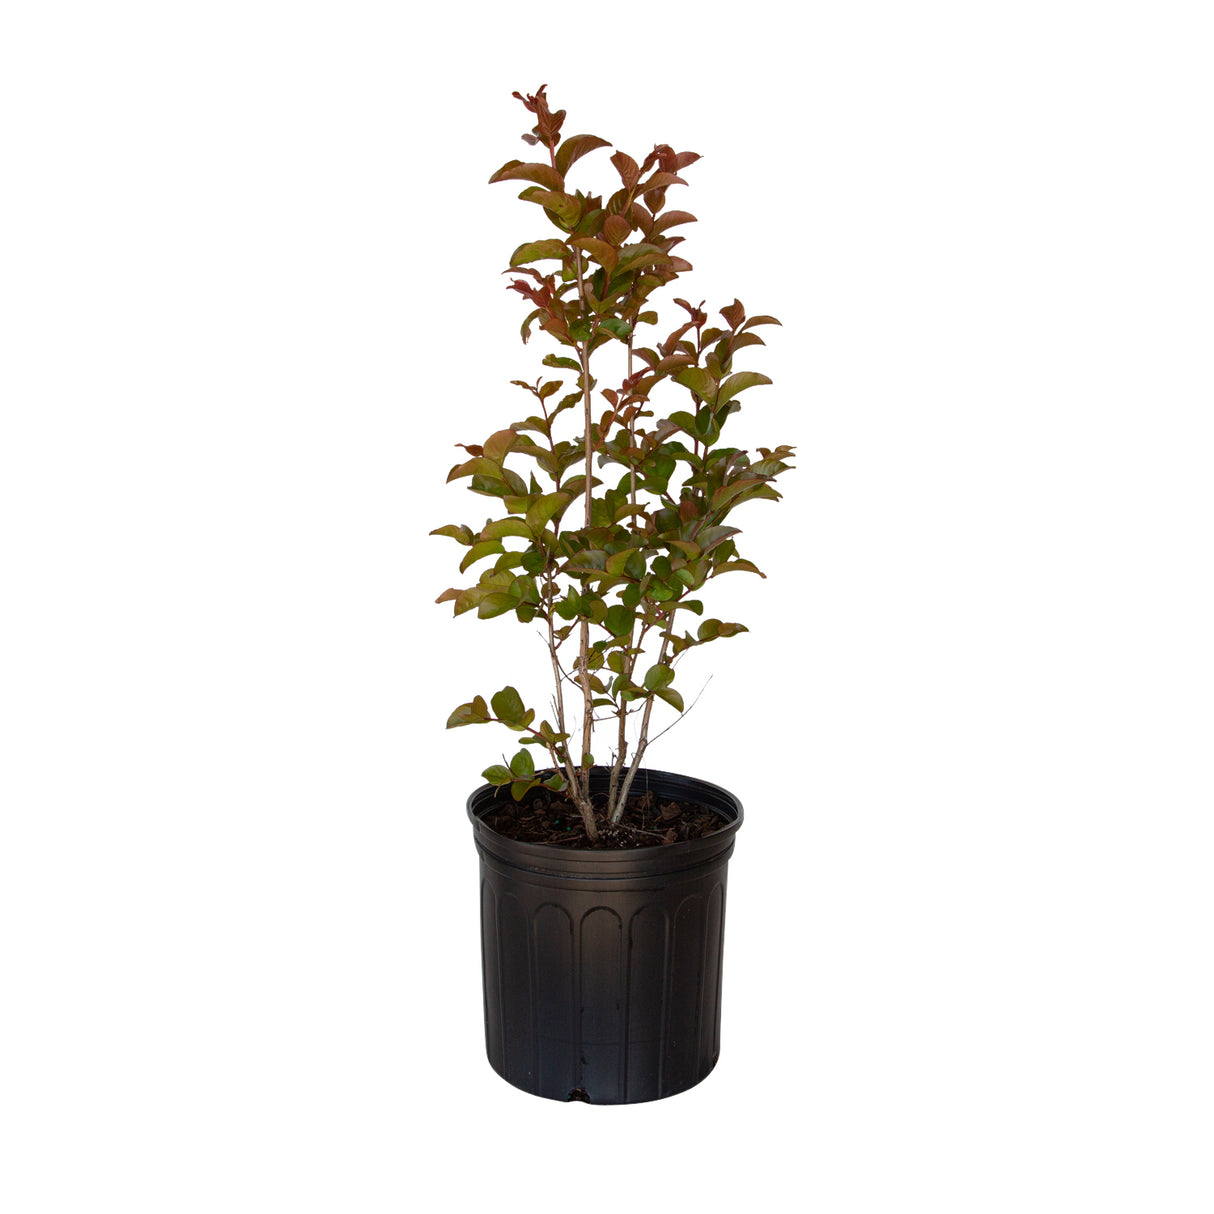 2.5 Gallon Miss Frances Crape Myrtle tree for sale with decidious green leaves in a black pot on a white background